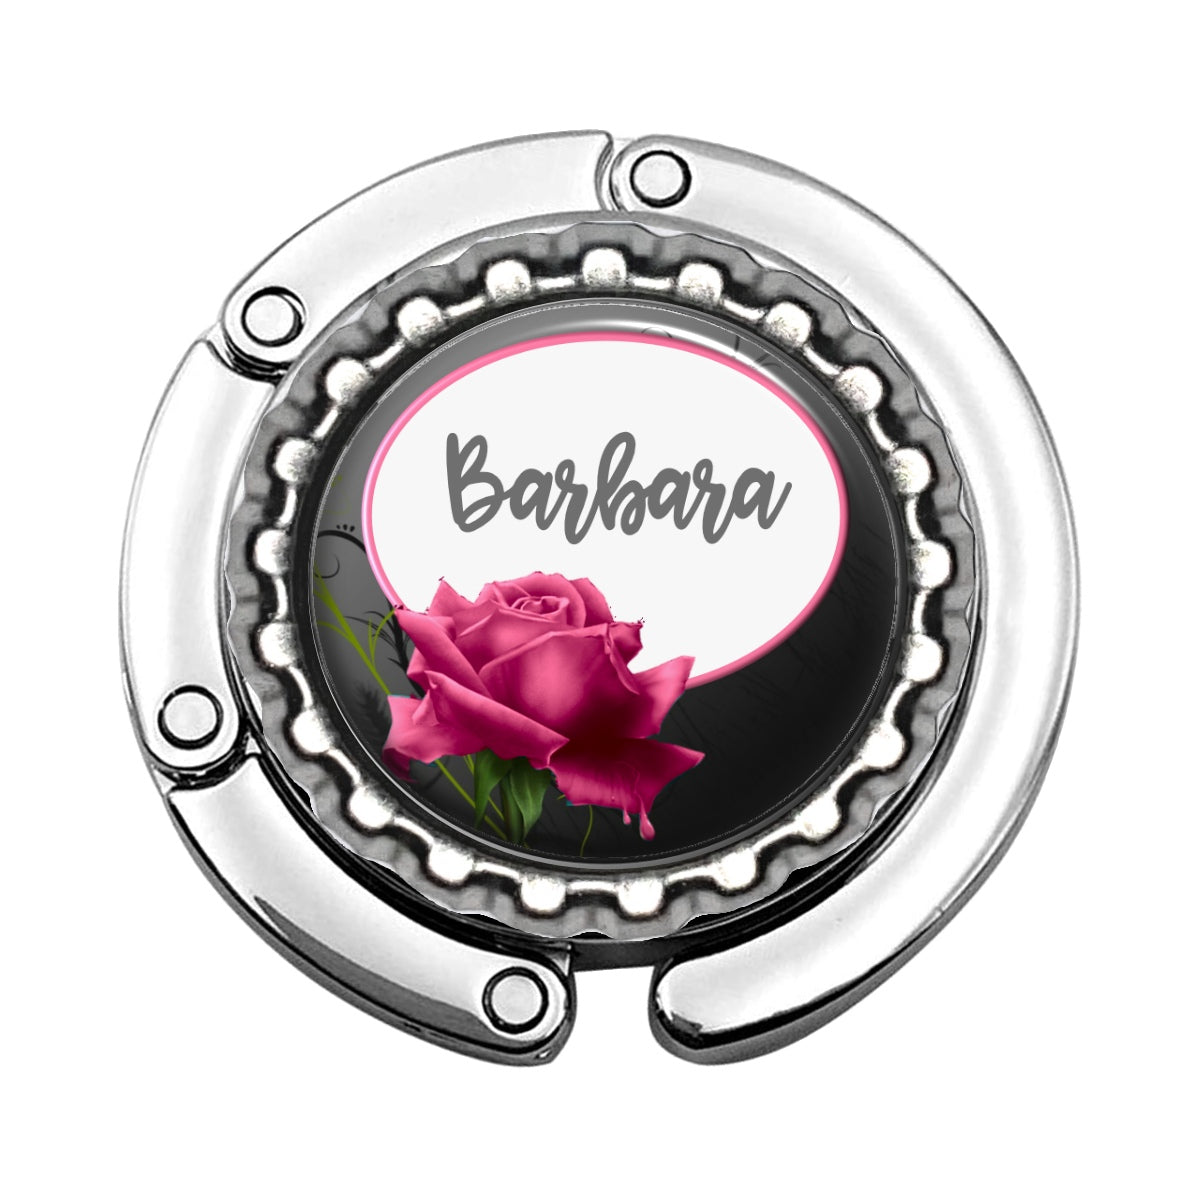 a bottle cap with a pink rose on it